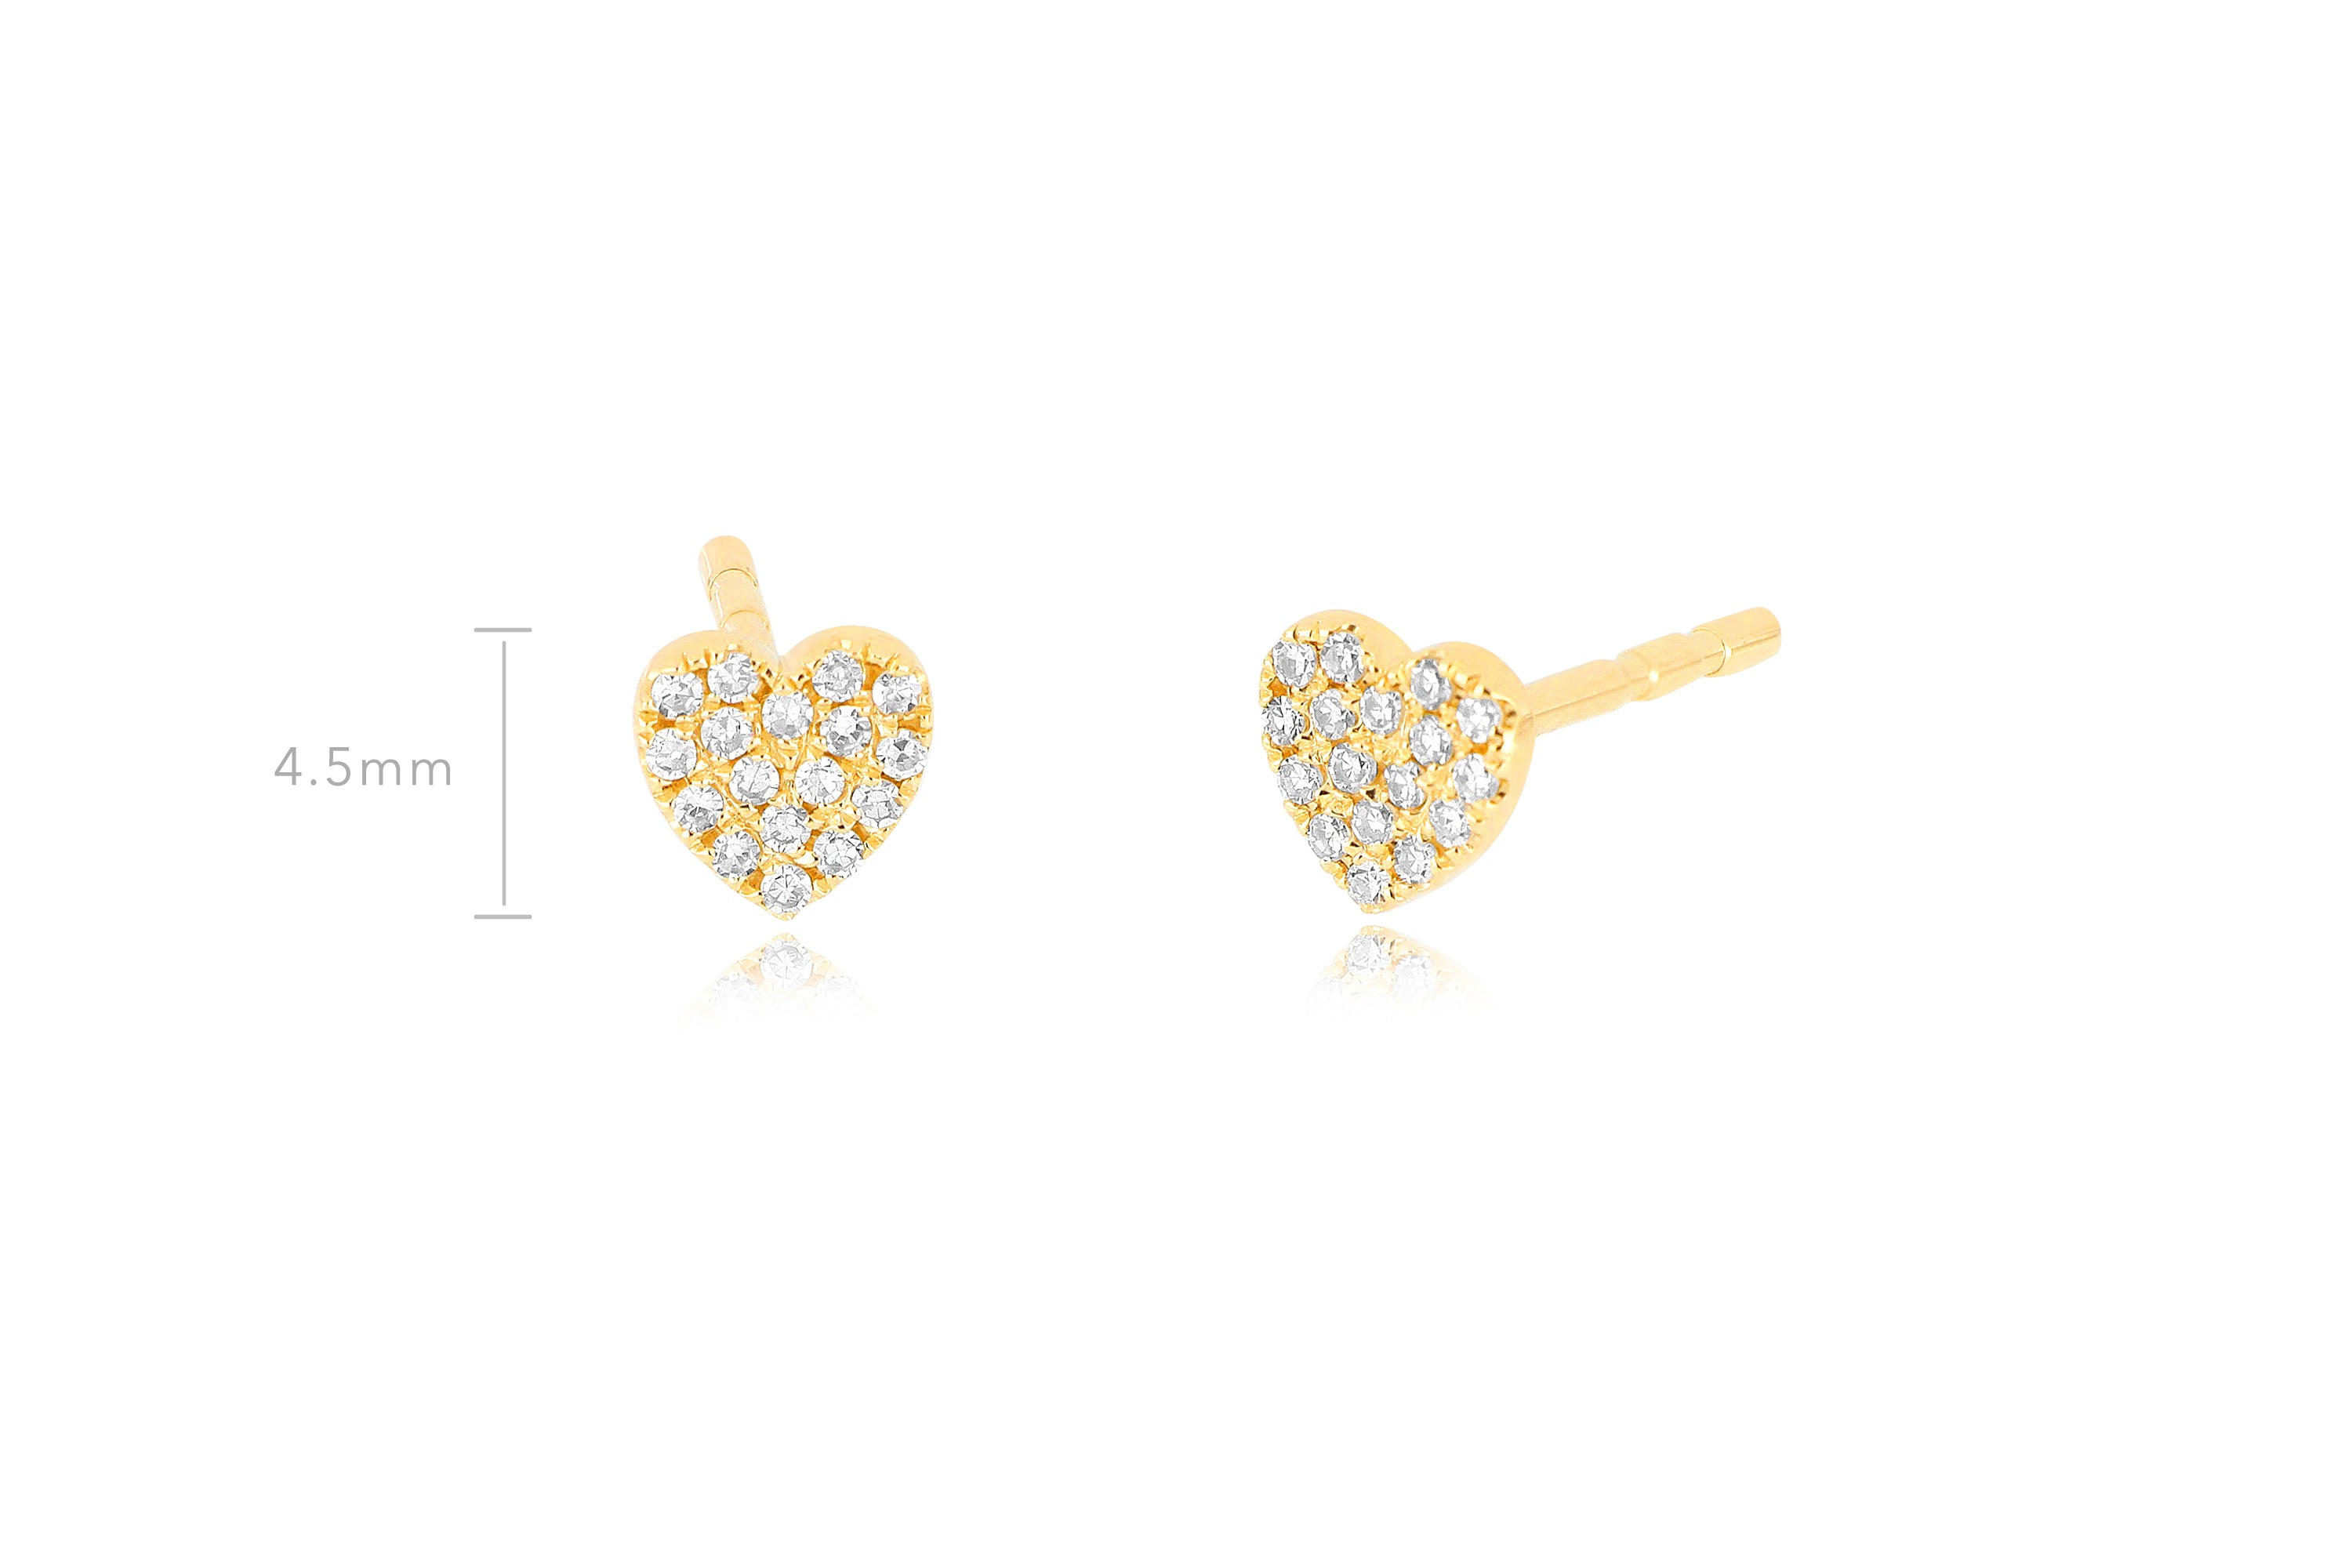 18K Gold Layered Simple Baby Heart Earrings Wholesale Jewelry Supplies Mini 5mm